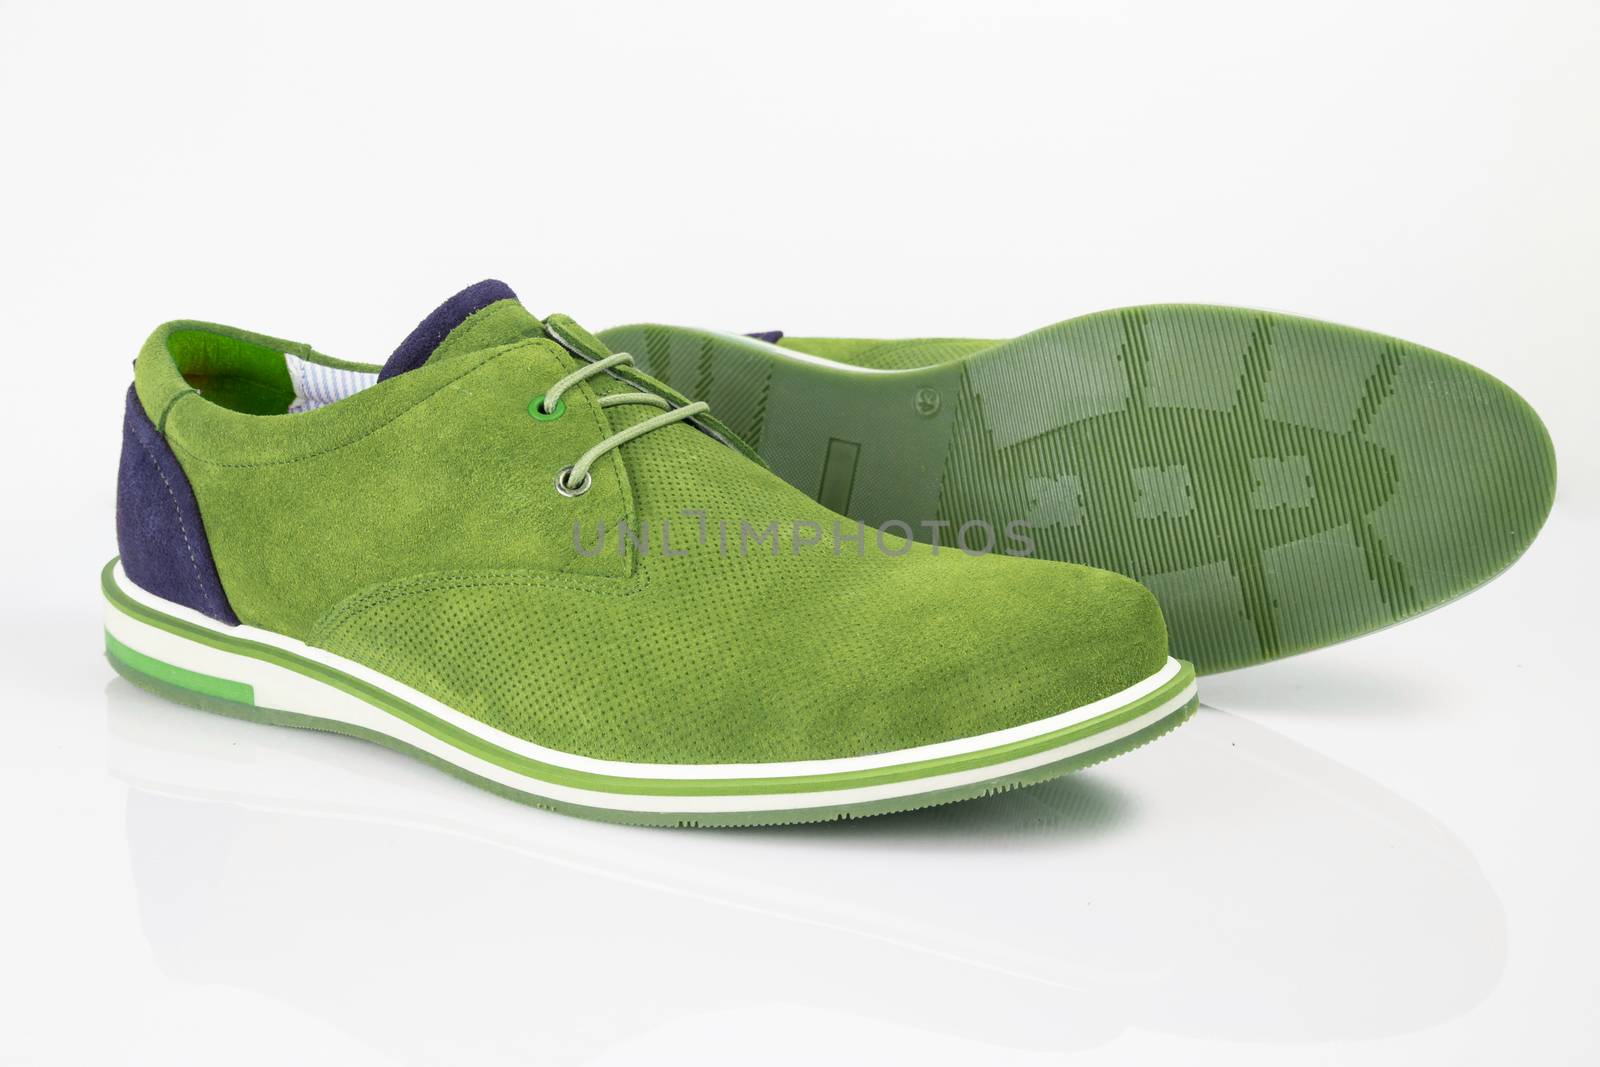 Male green leather elegant shoes on white background, isolated product. by GeorgeVieiraSilva